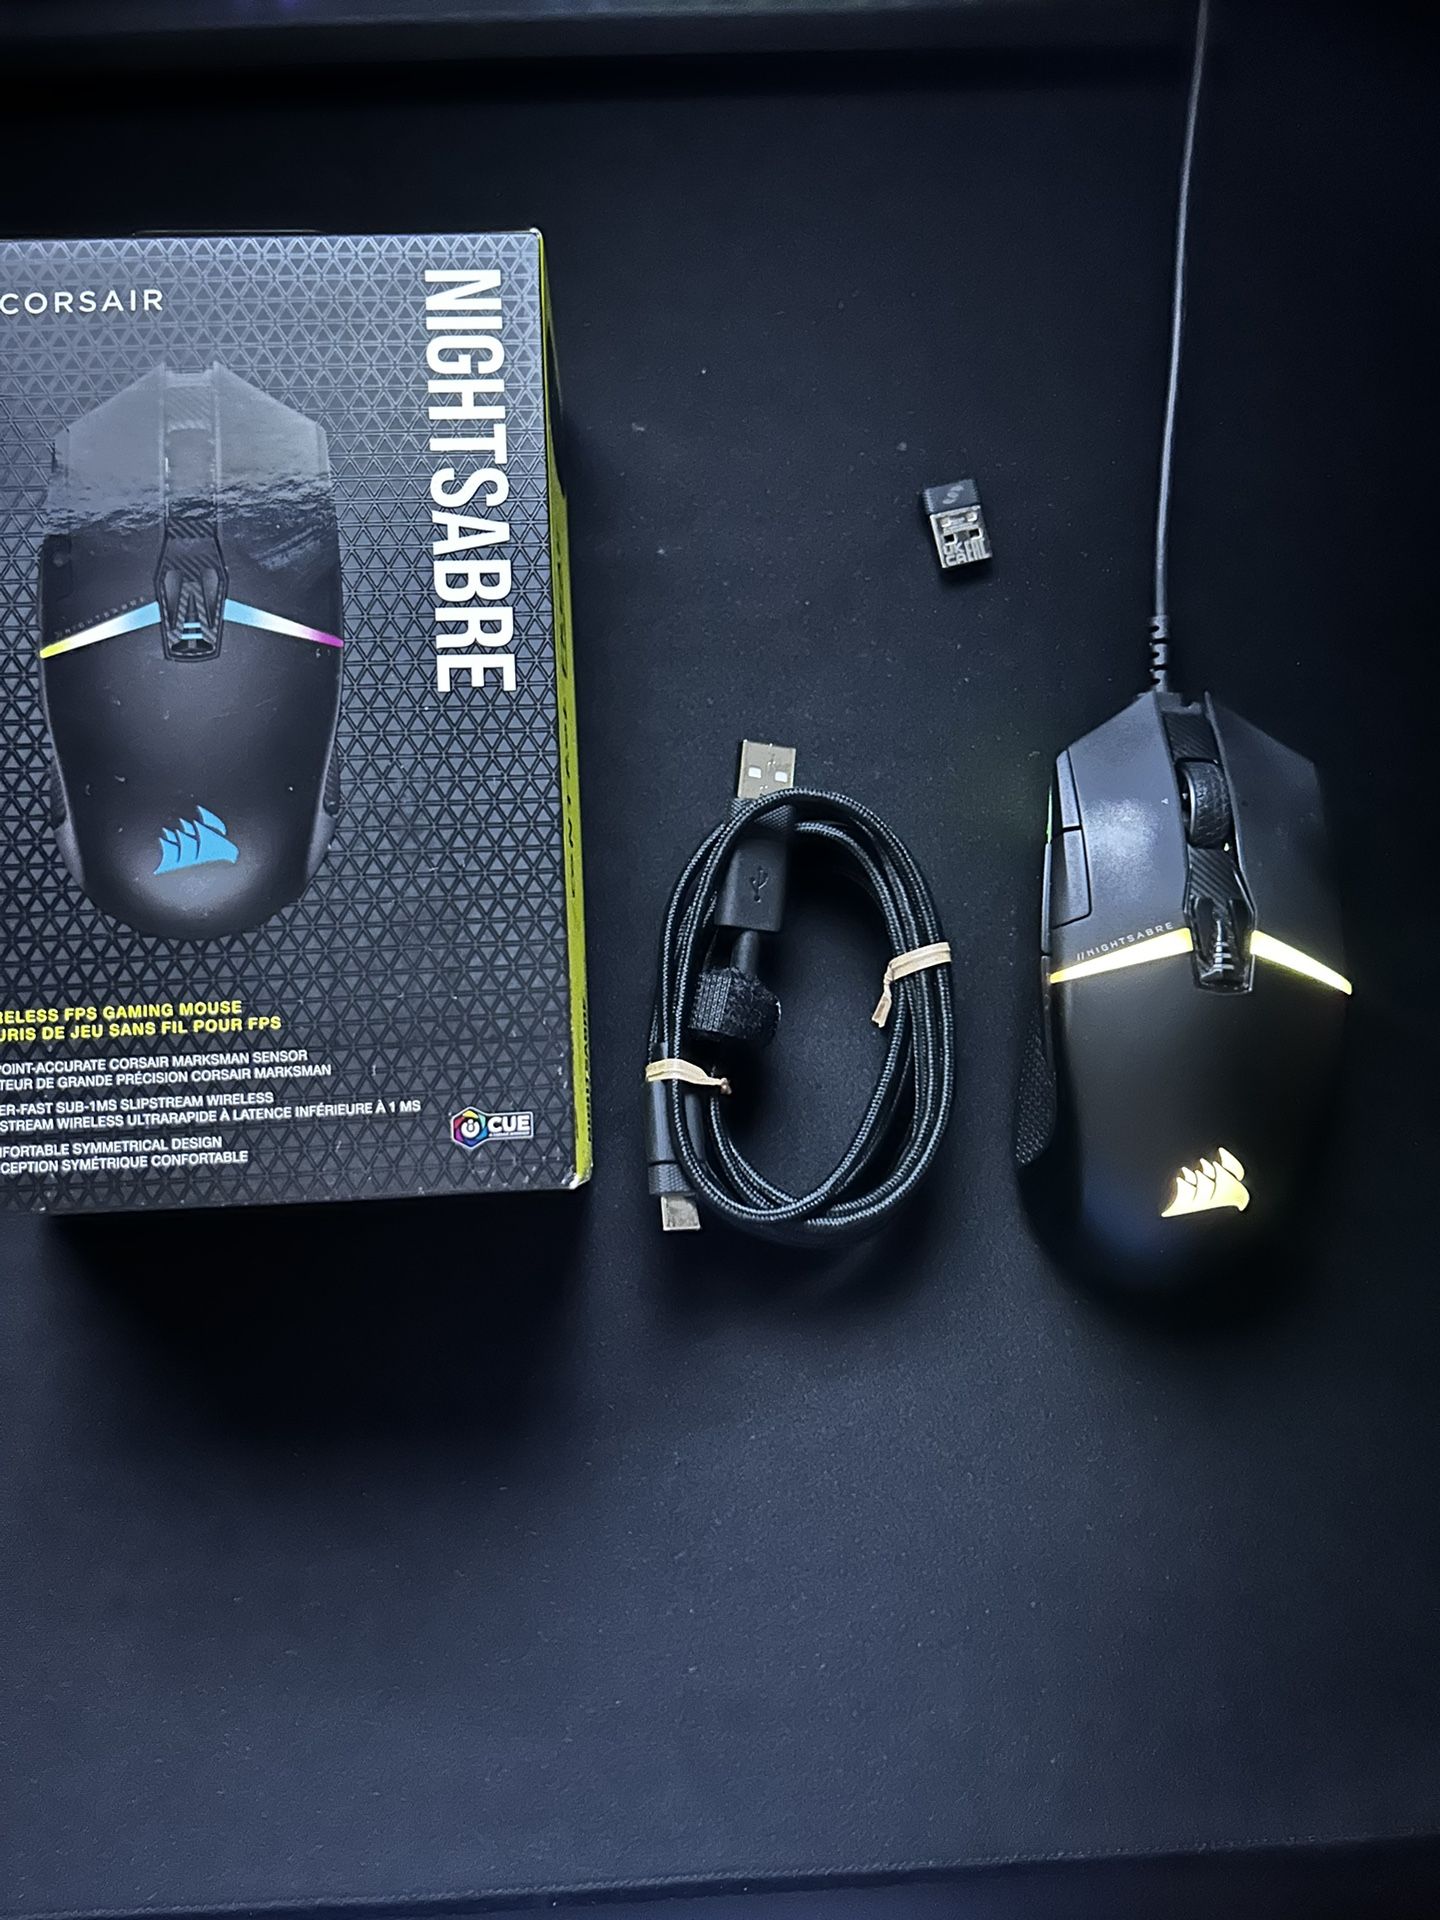 Cosair Nightsabre Wireless Mouse 